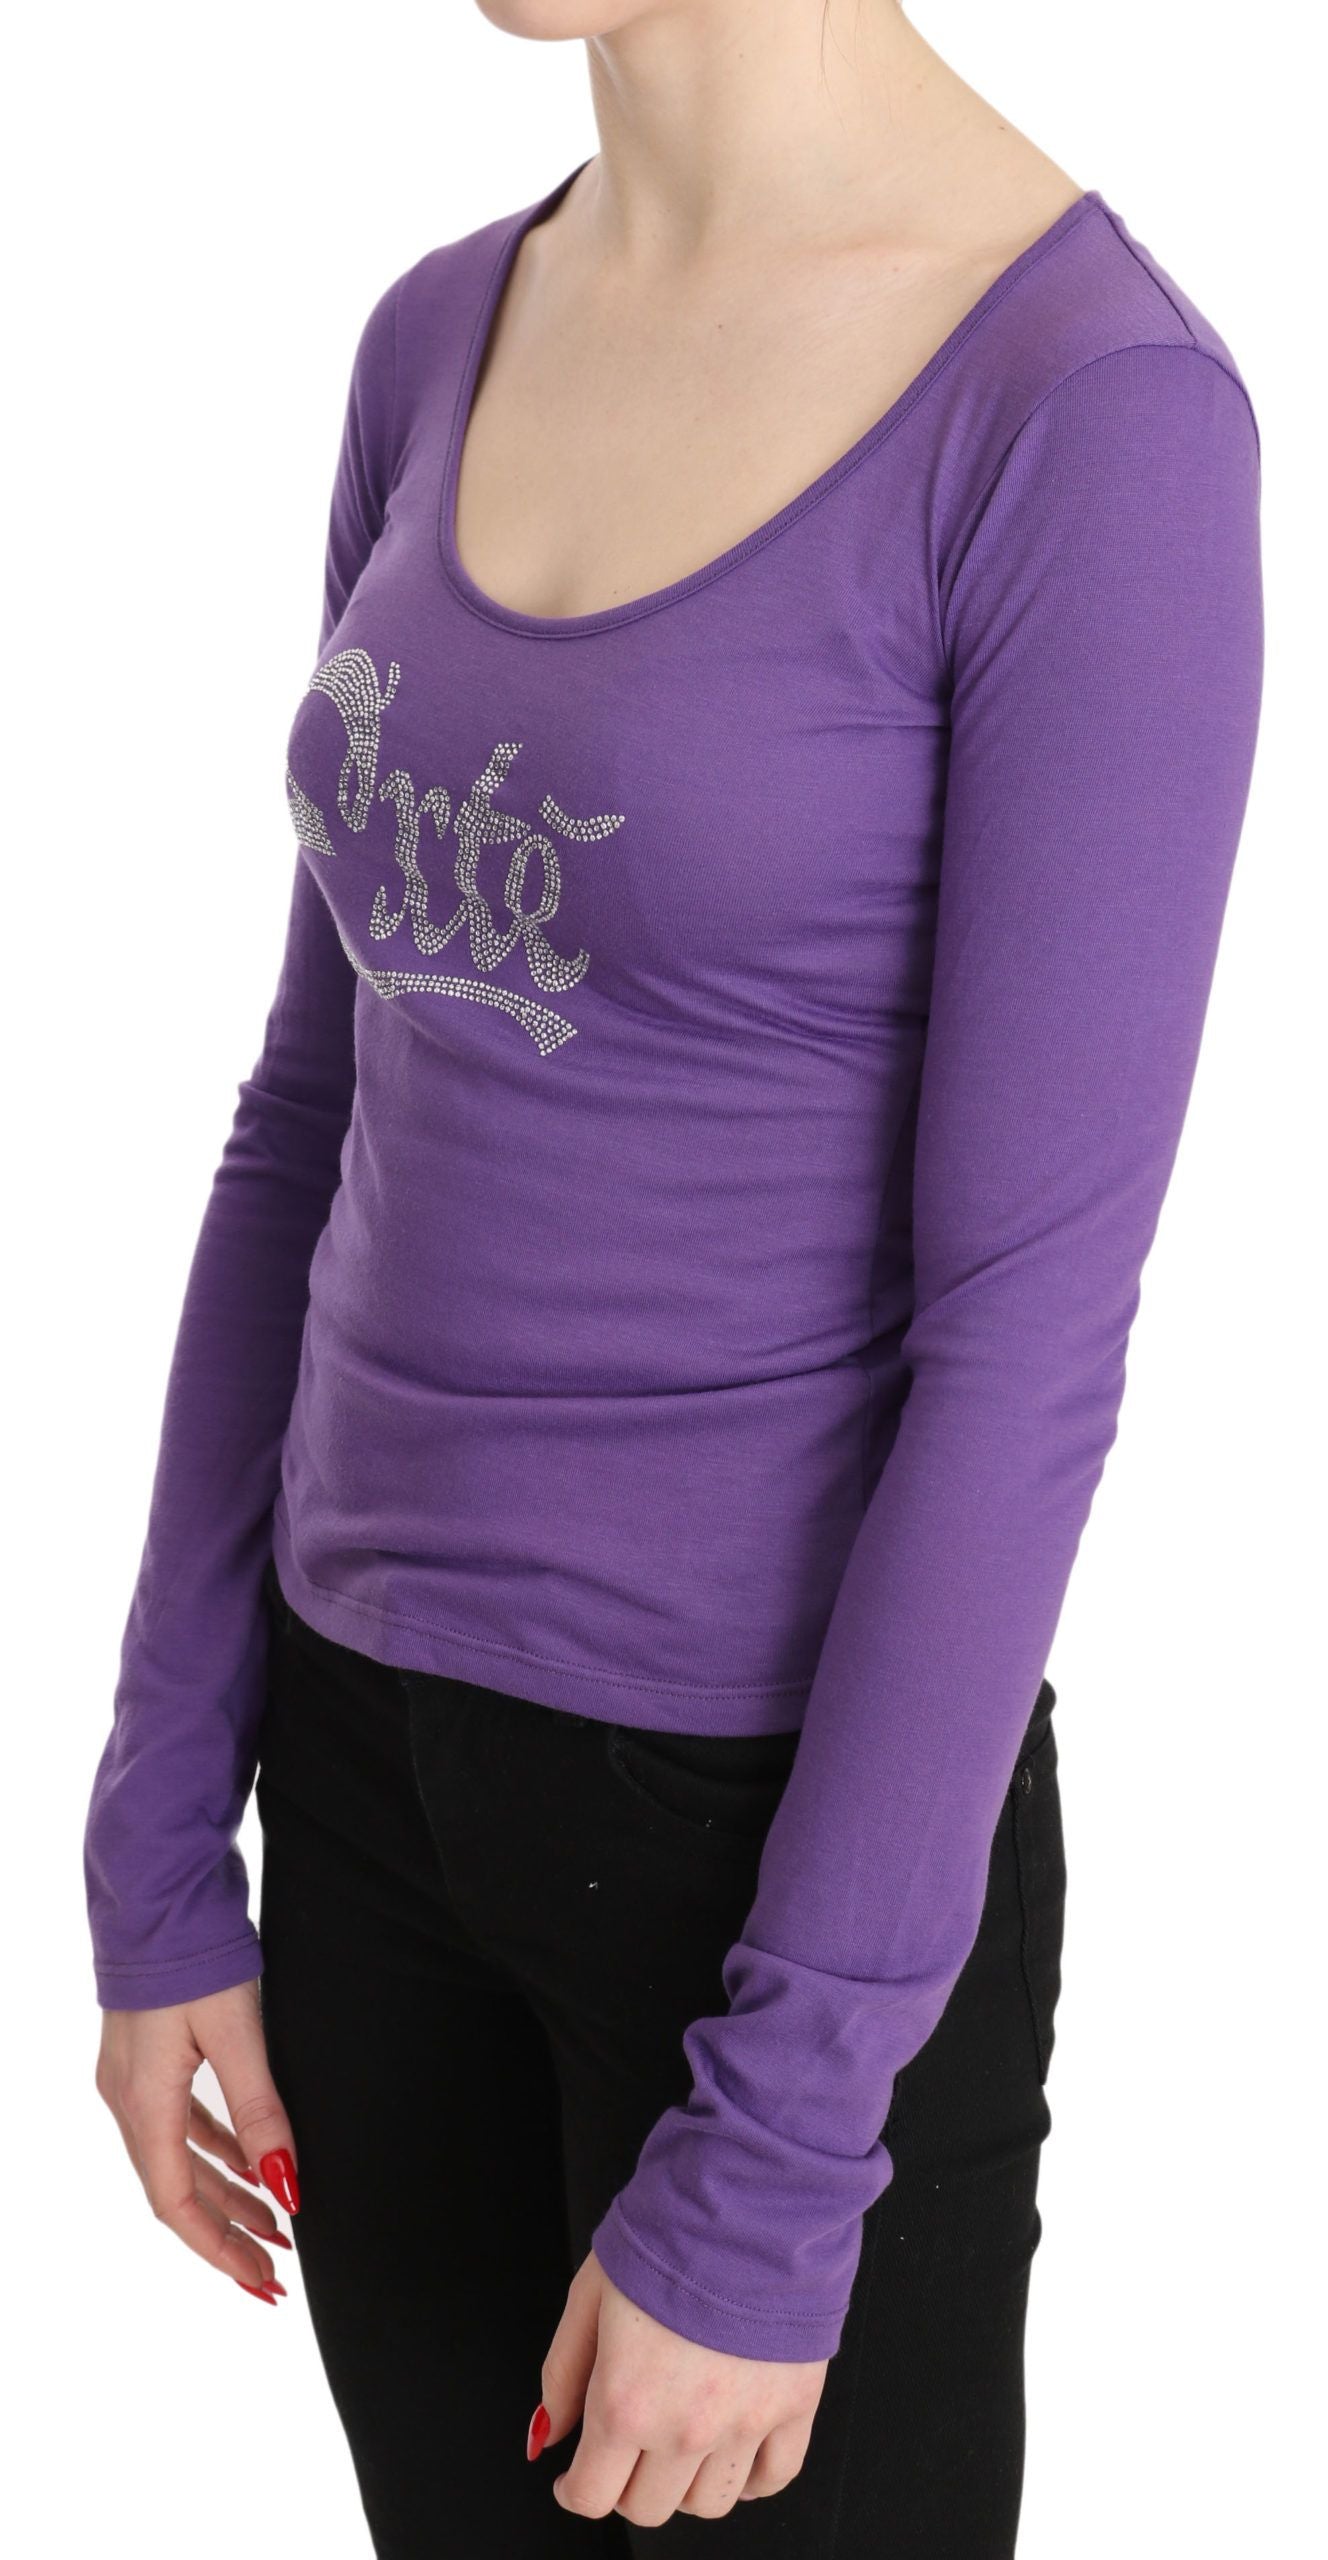 Exte Purple Exte Crystal Embellished Long Sleeve Top Blouse